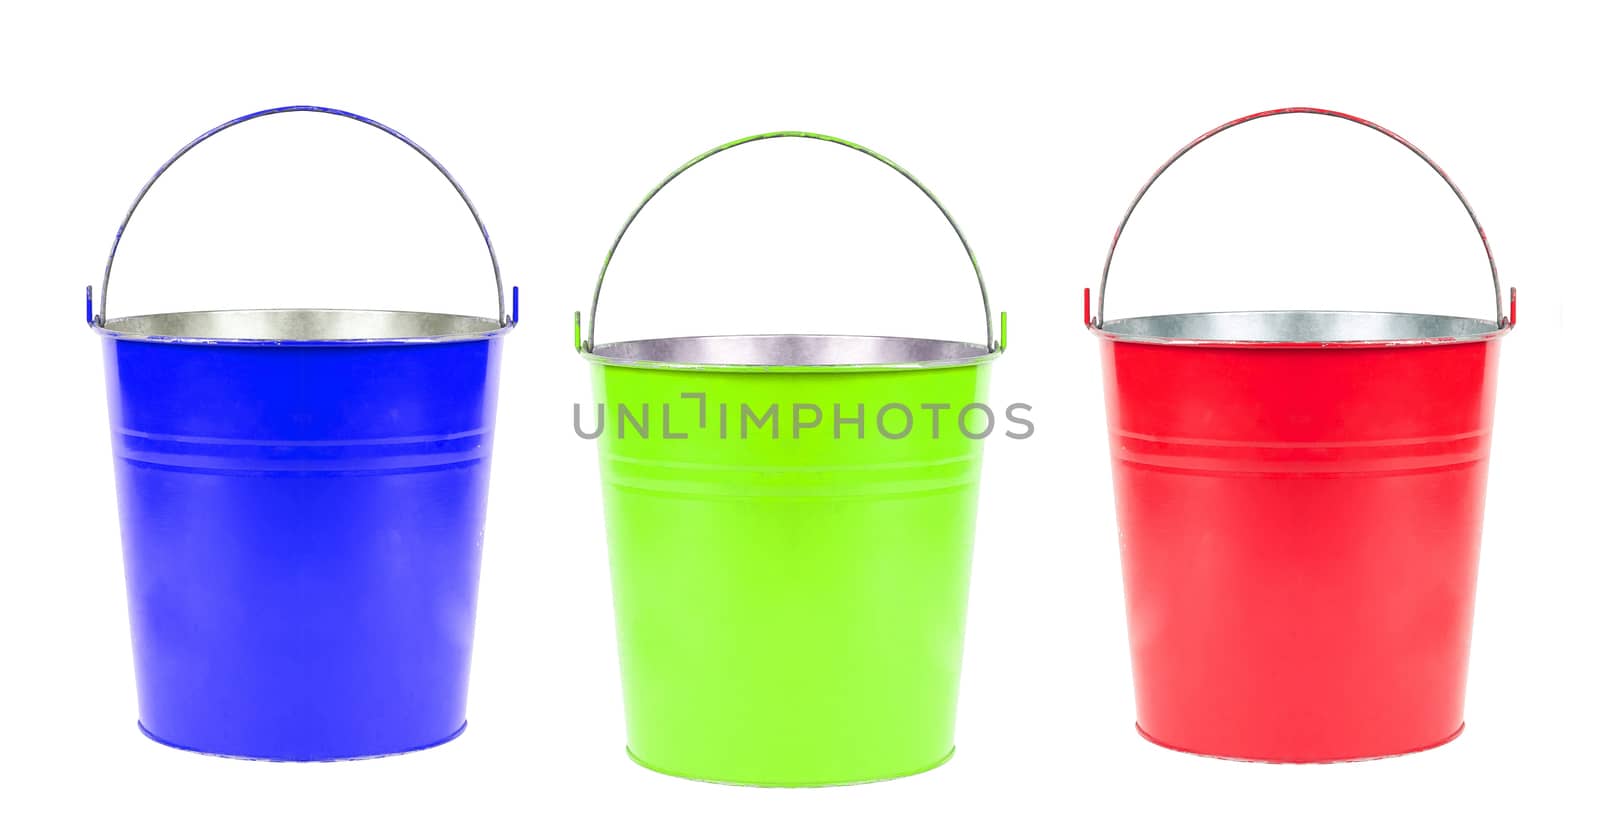 blue, green, red buckets isolated by ozaiachin